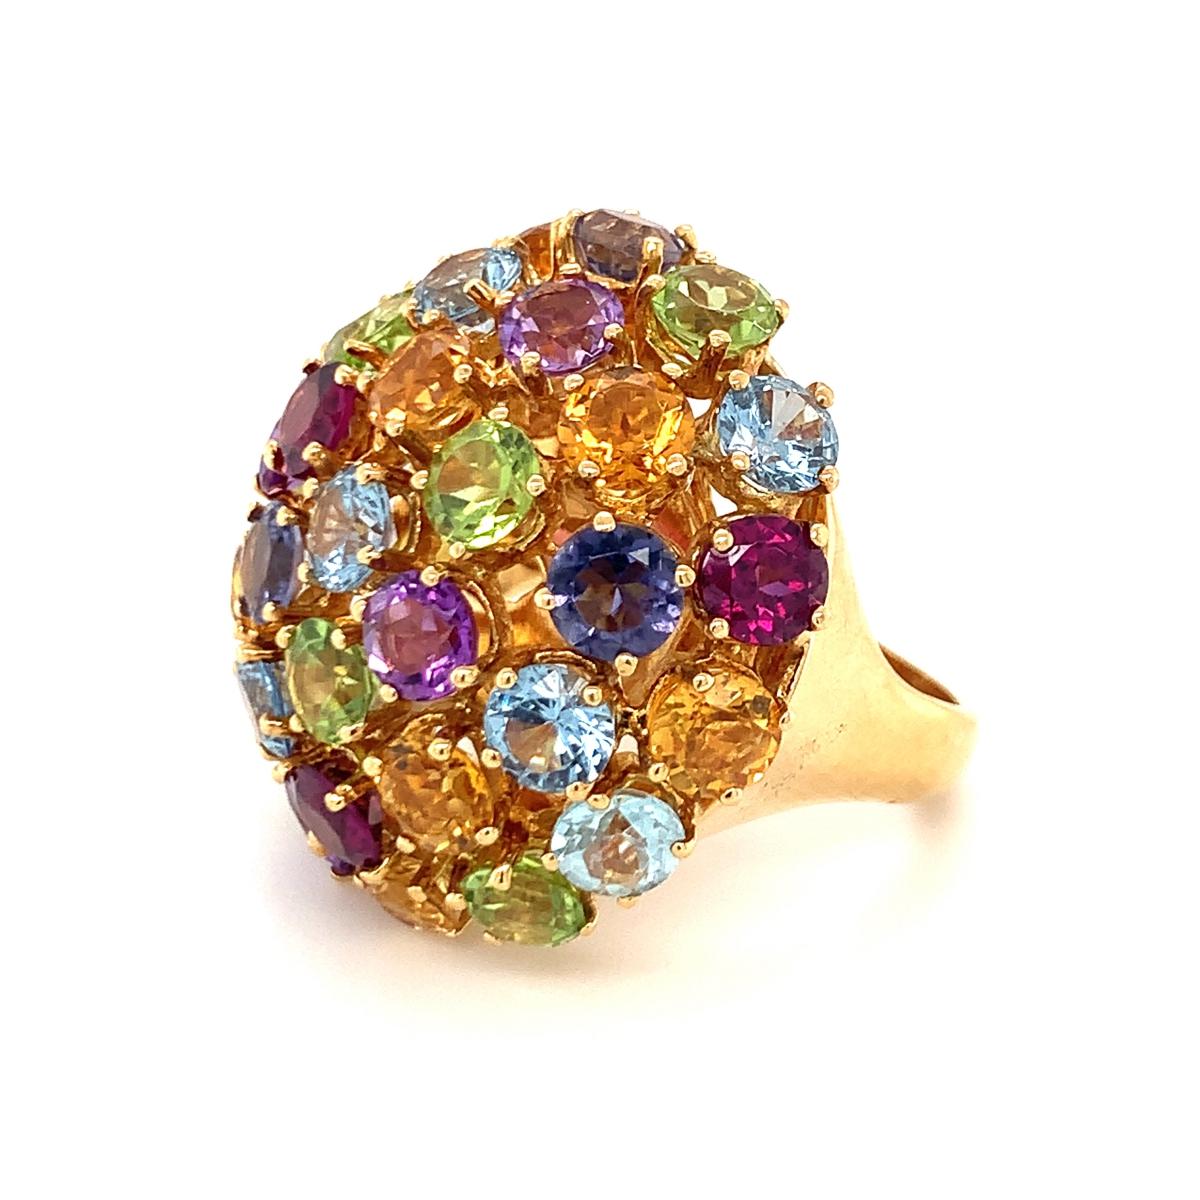 Multi-Gem Bombe Ring in 18K Yellow Gold, circa 1960s For Sale 3